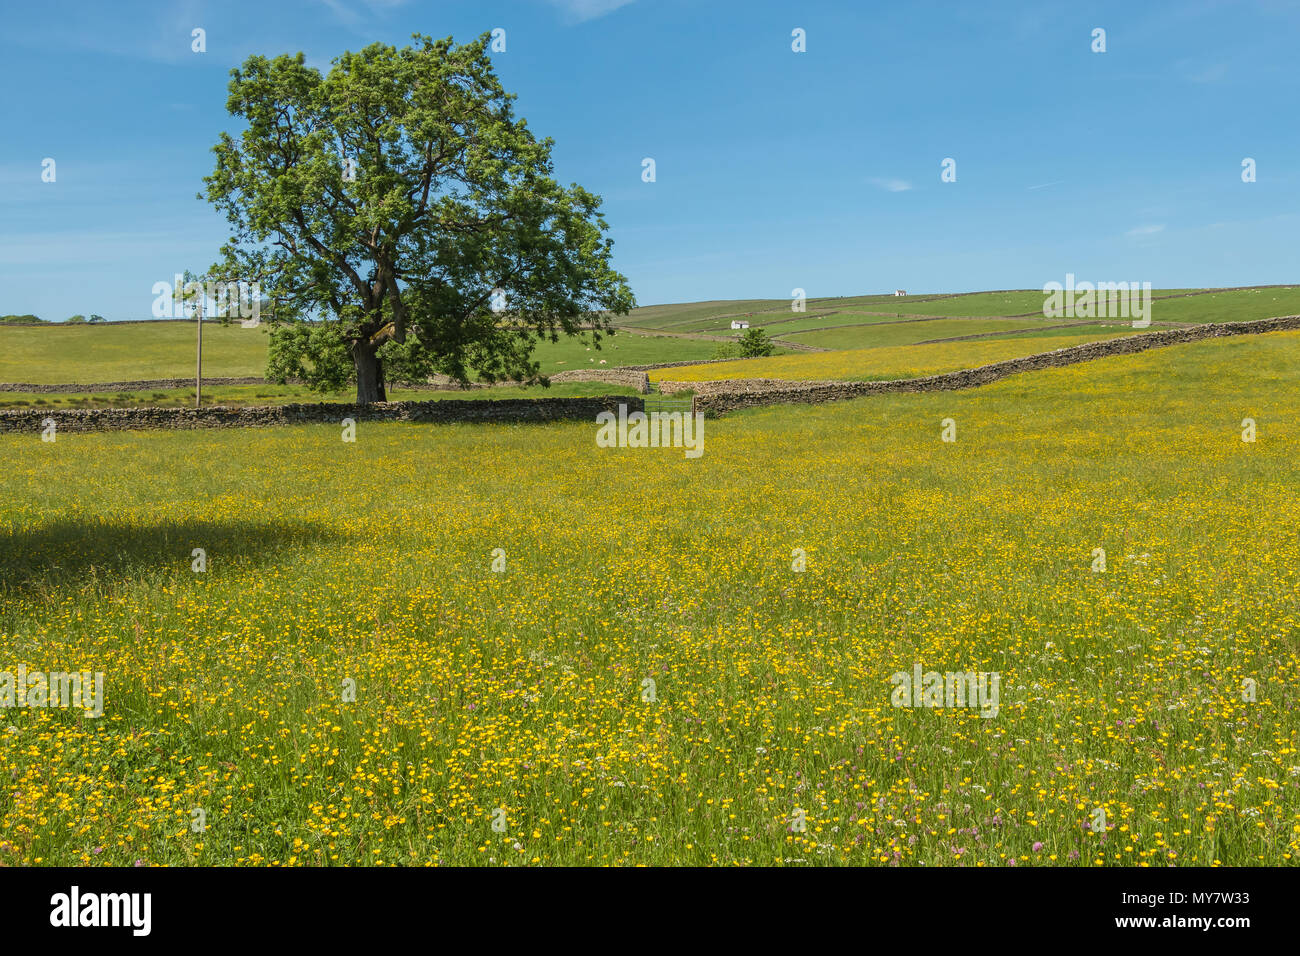 Upper Teesdale landscape, flowering hay meadows, dry stone walls and whitewashed barns at Bowlees, North Pennines AONB, UK Stock Photo